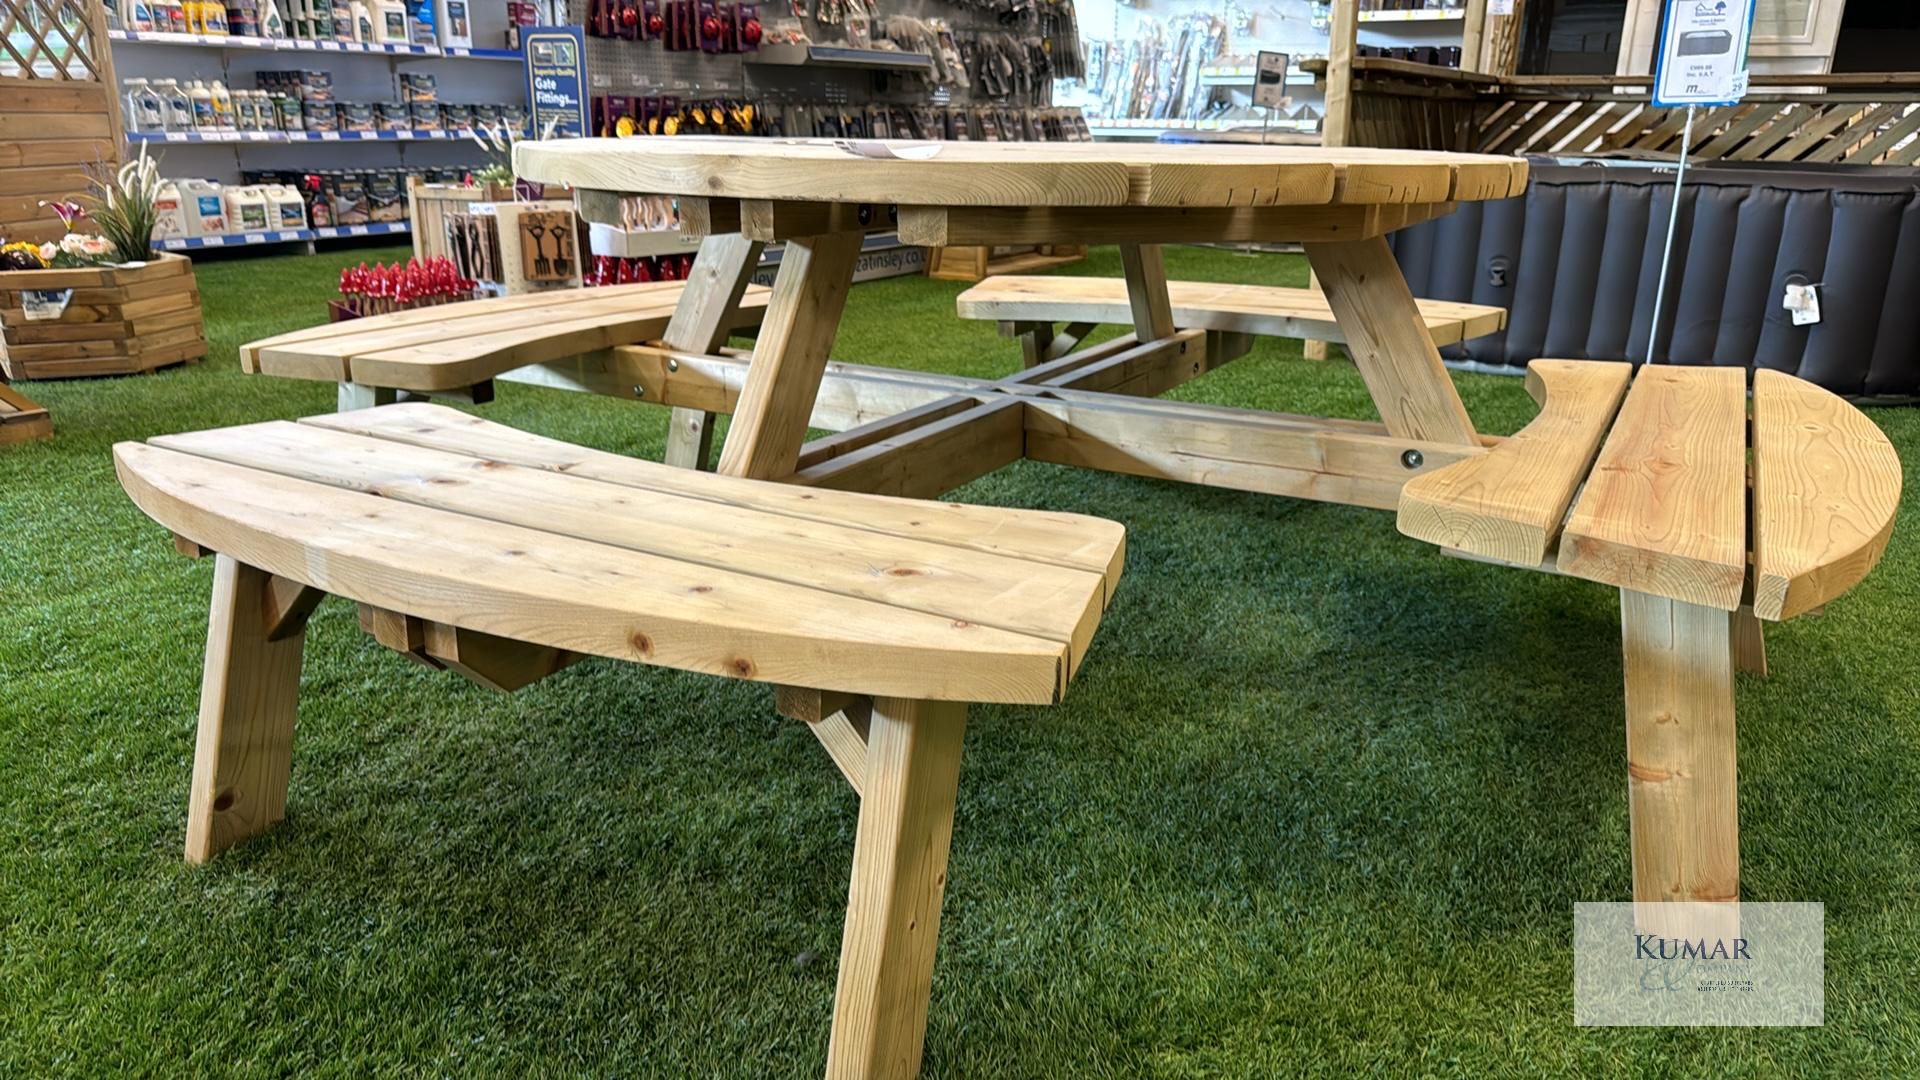 Rose Round Picnic Table w2.10m x h 2.23m, RRP £555.99 - Image 8 of 8